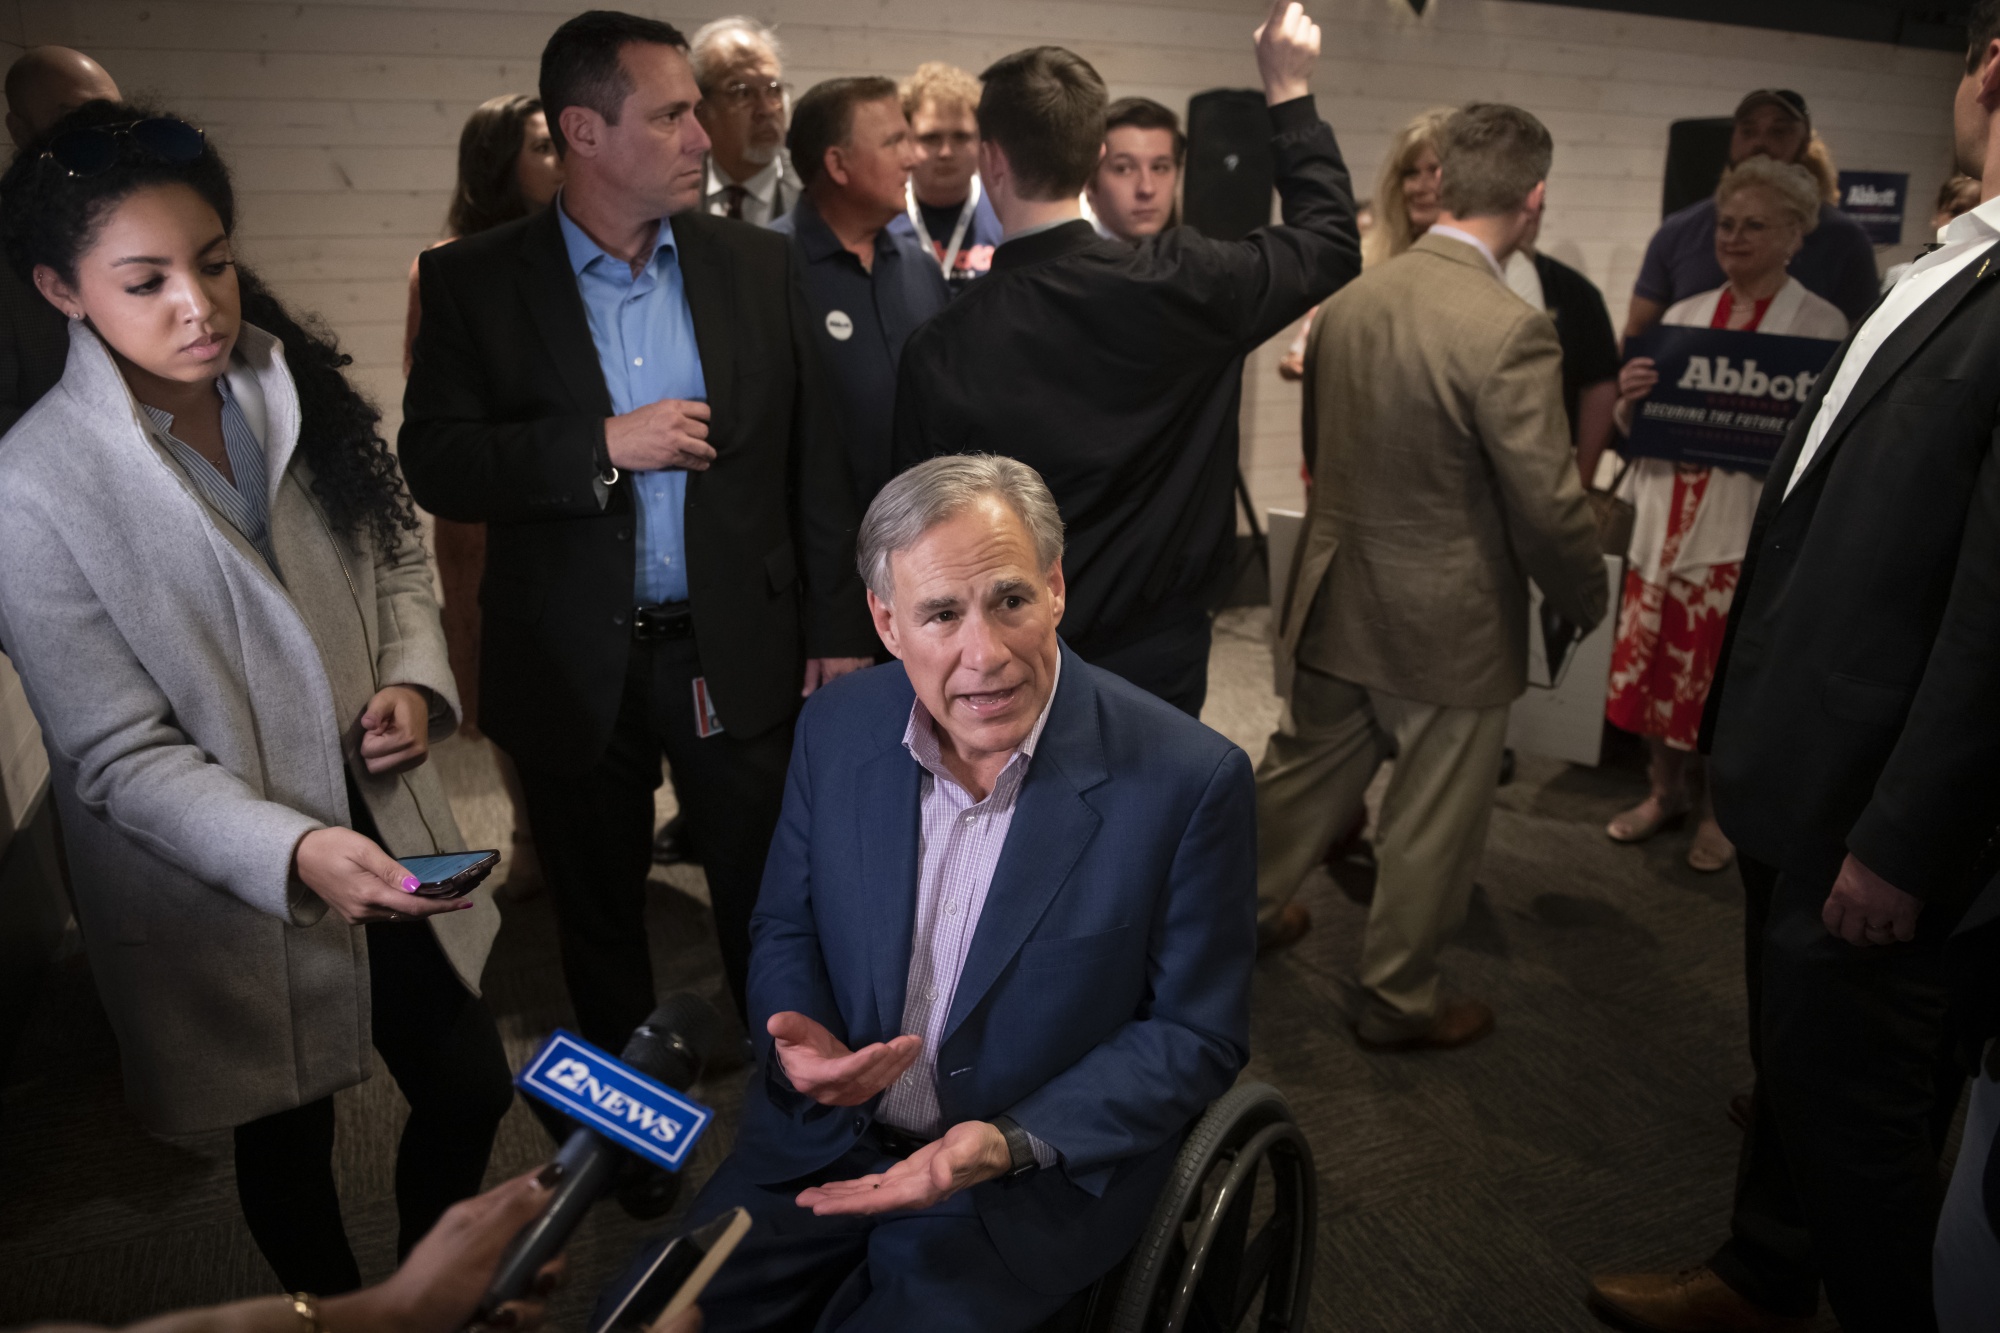 Greg Abbott speaks during a Get Out The Vote campaign event in Beaumont, Texas, on Feb. 17.